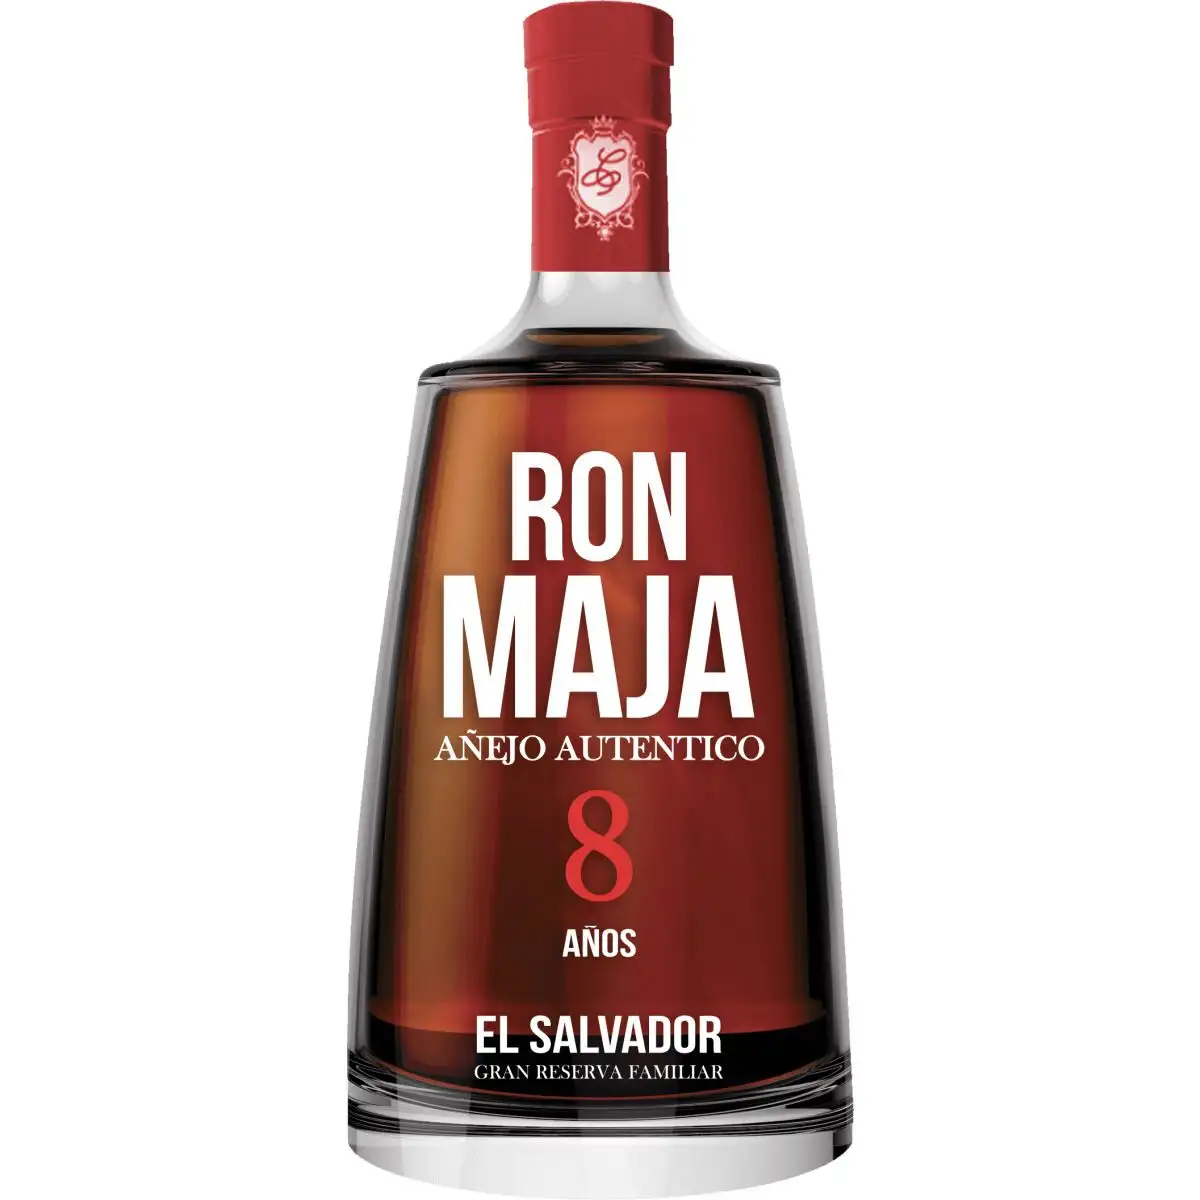 Image of the front of the bottle of the rum Ron Maja 8 Años